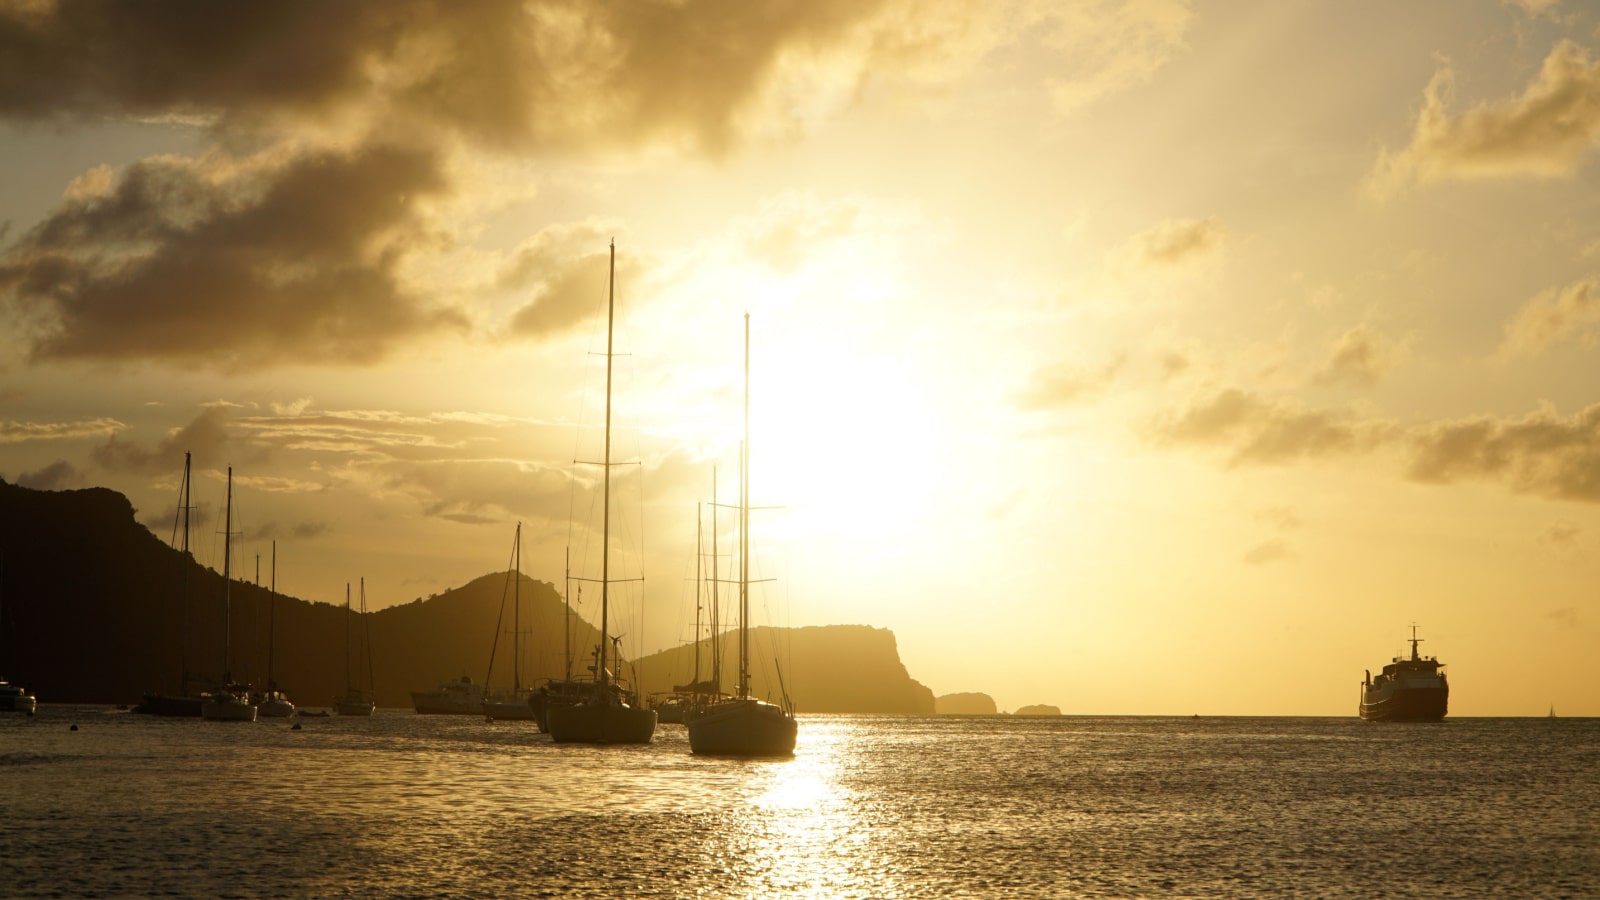 Sunset over Union Island with Sail boat yachts in the Tobago Cays near Saint Vincent and the Grenadines, Caribbean.